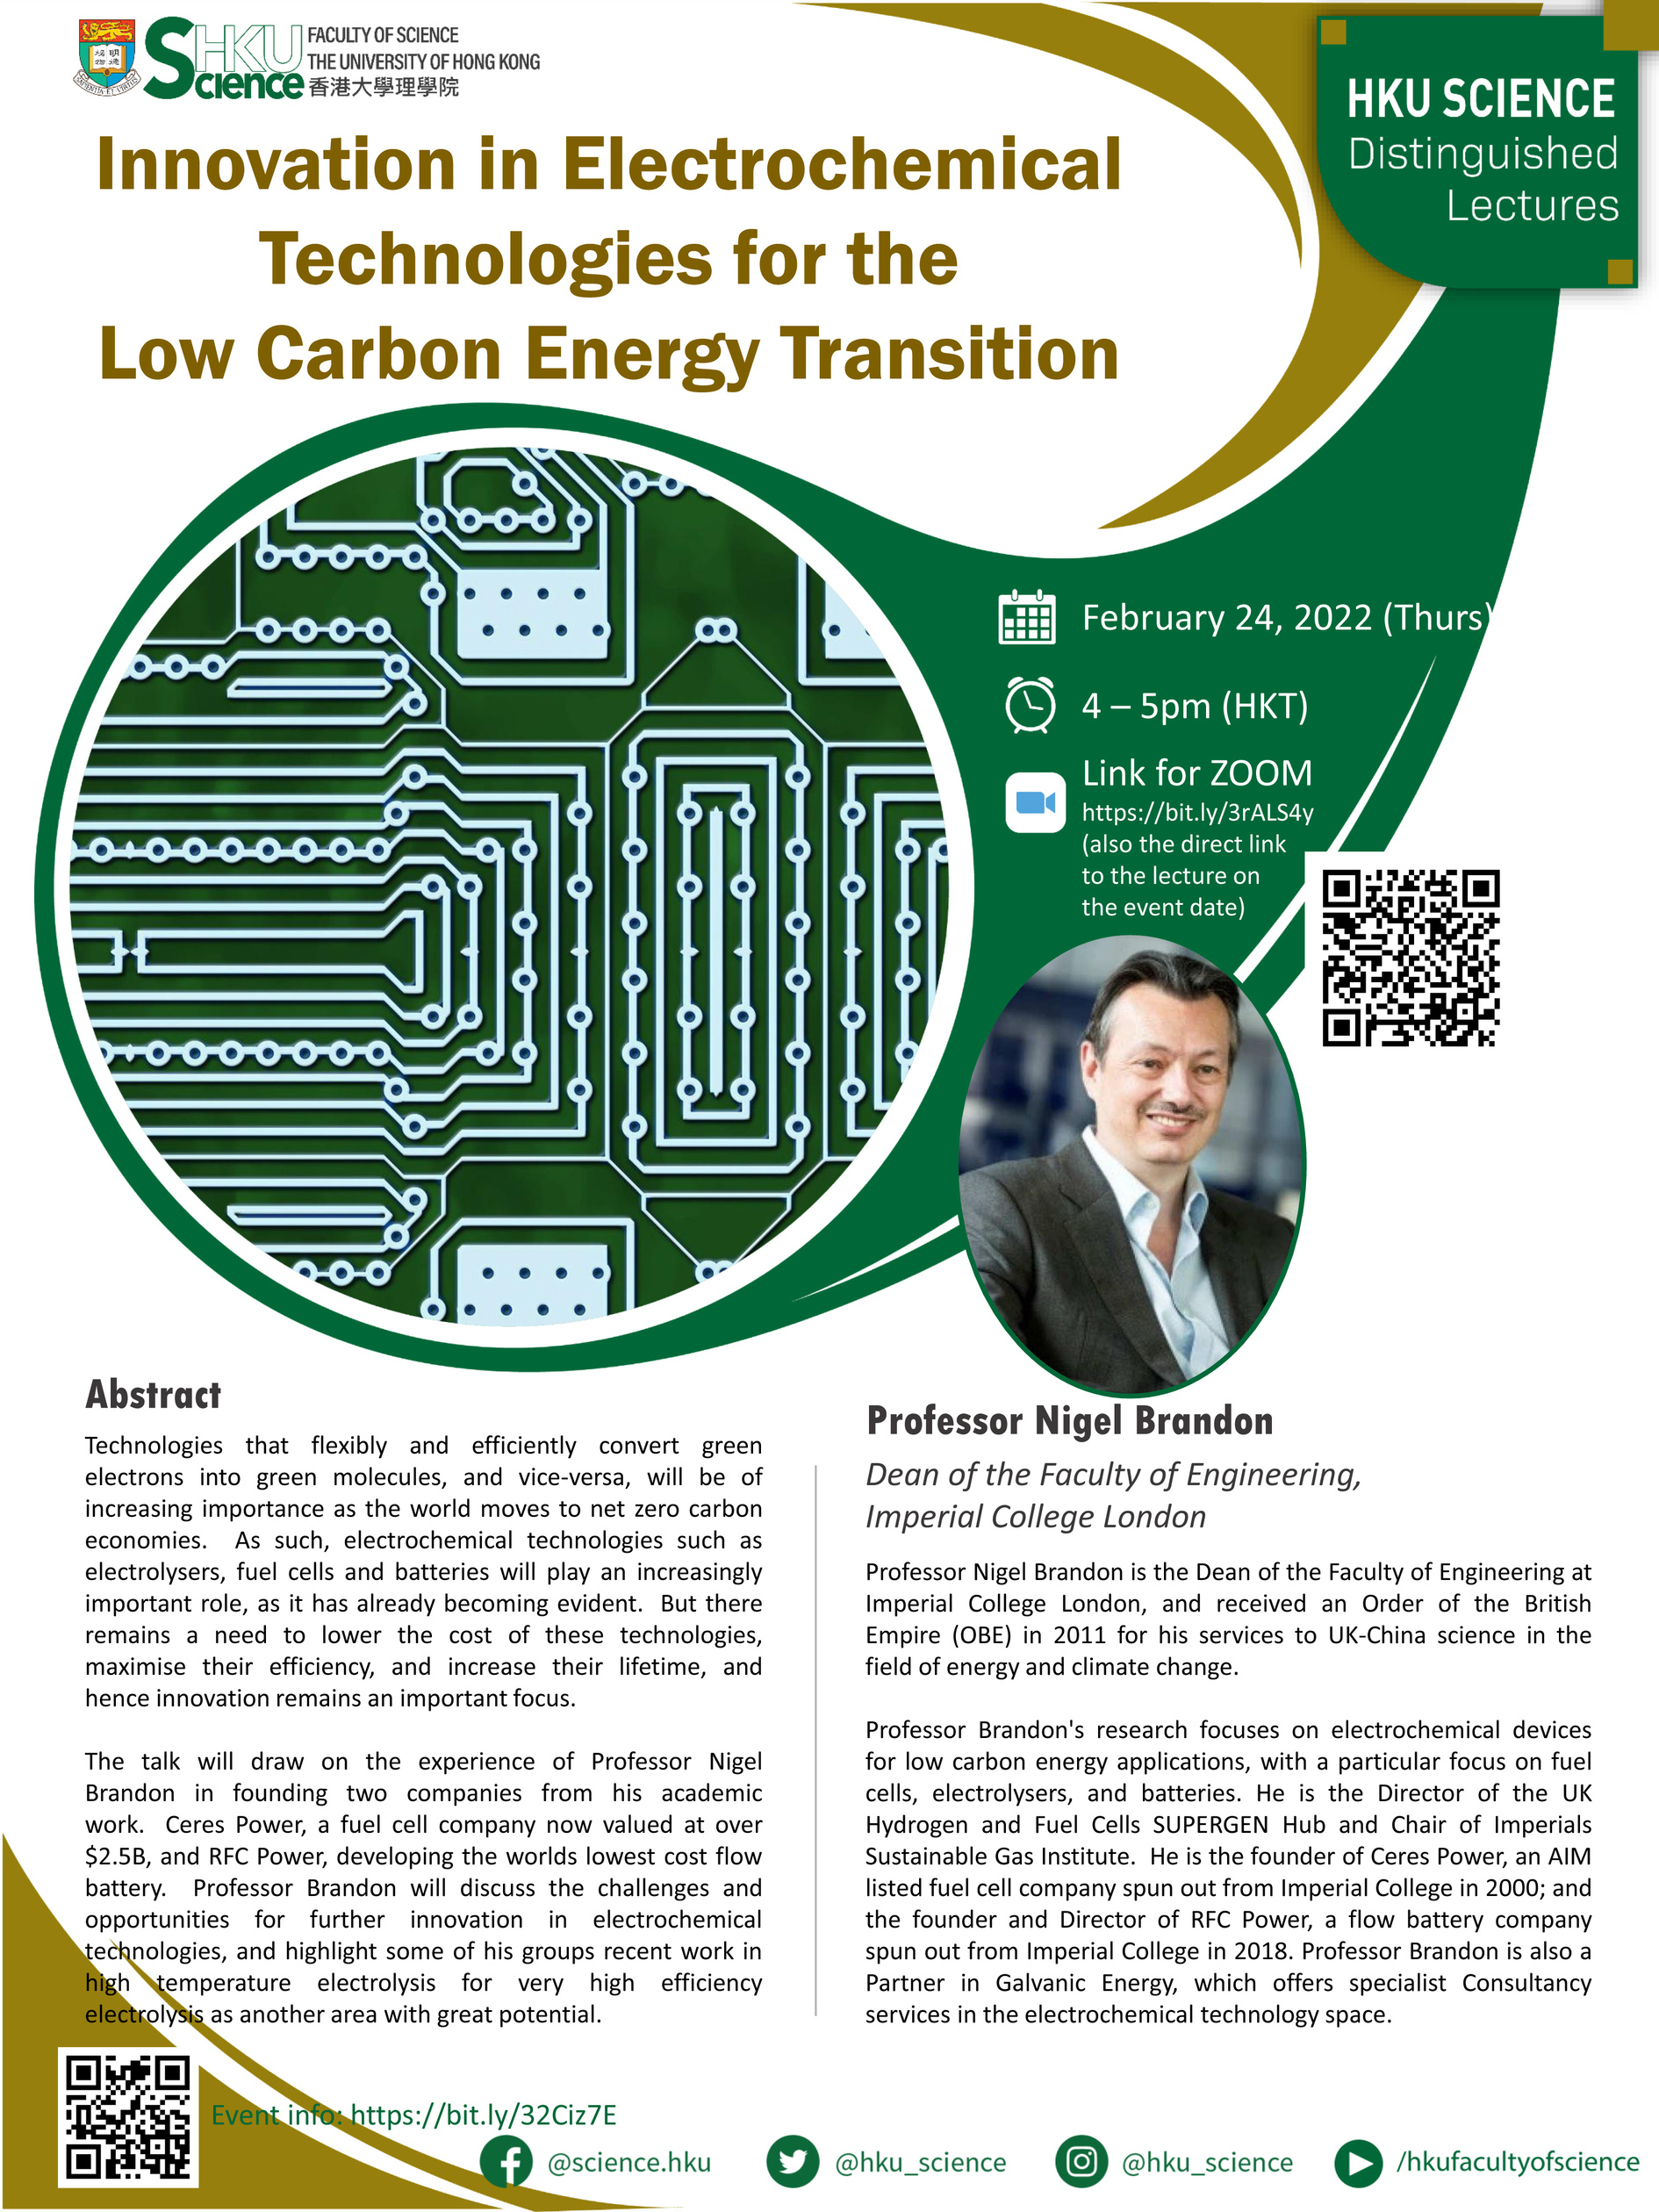 istinguished Lecture - Innovation in Electrochemical Technologies for the Low Carbon Energy Transition